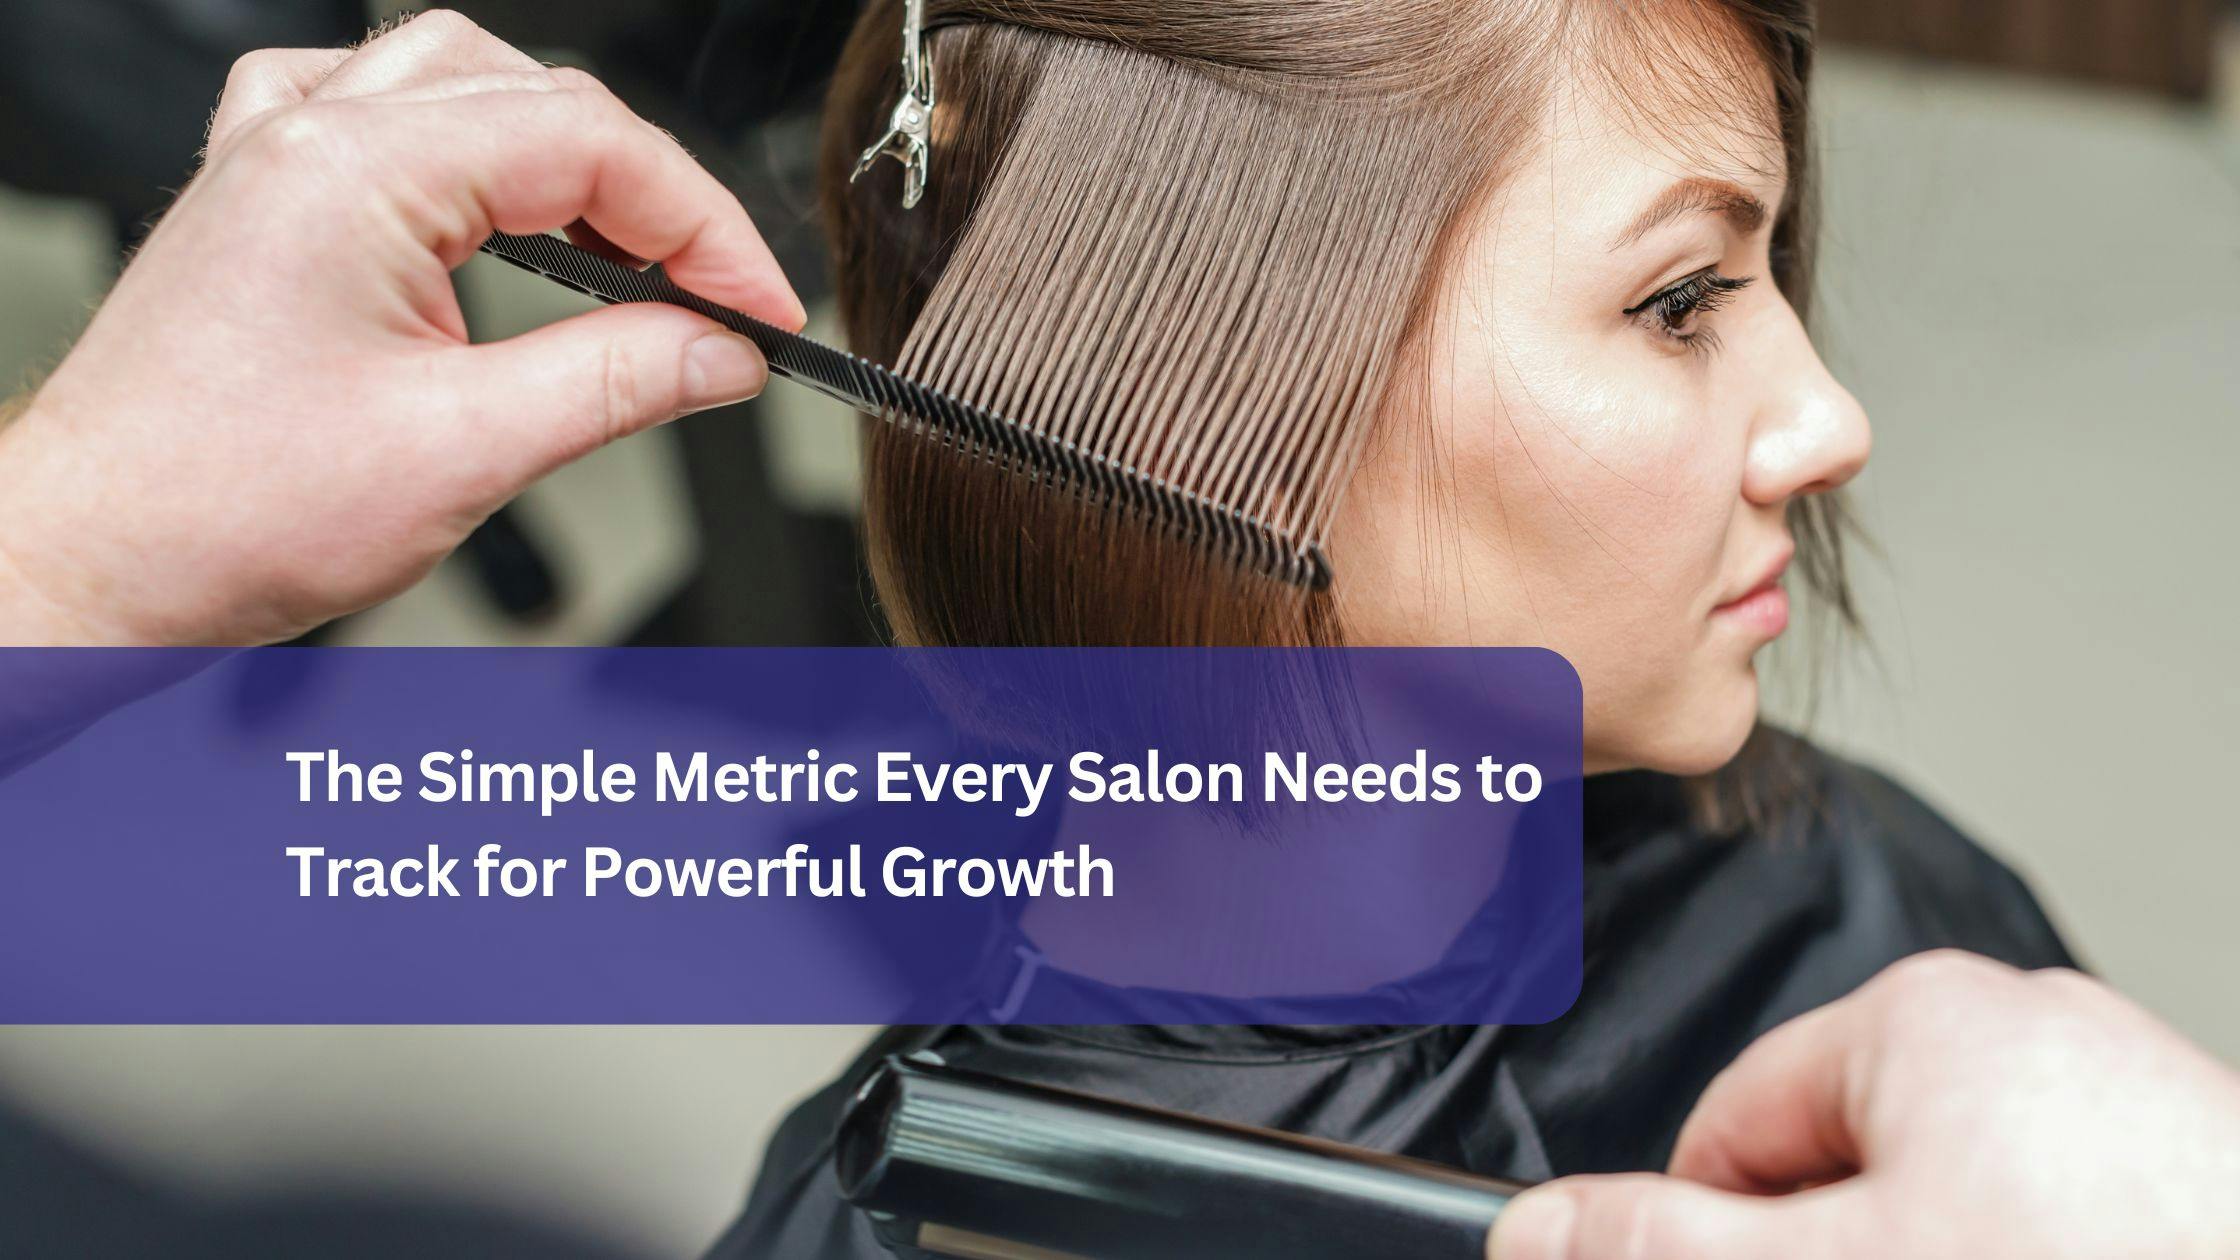 The Simple Metric Every Salon Needs to Track for Powerful Growth